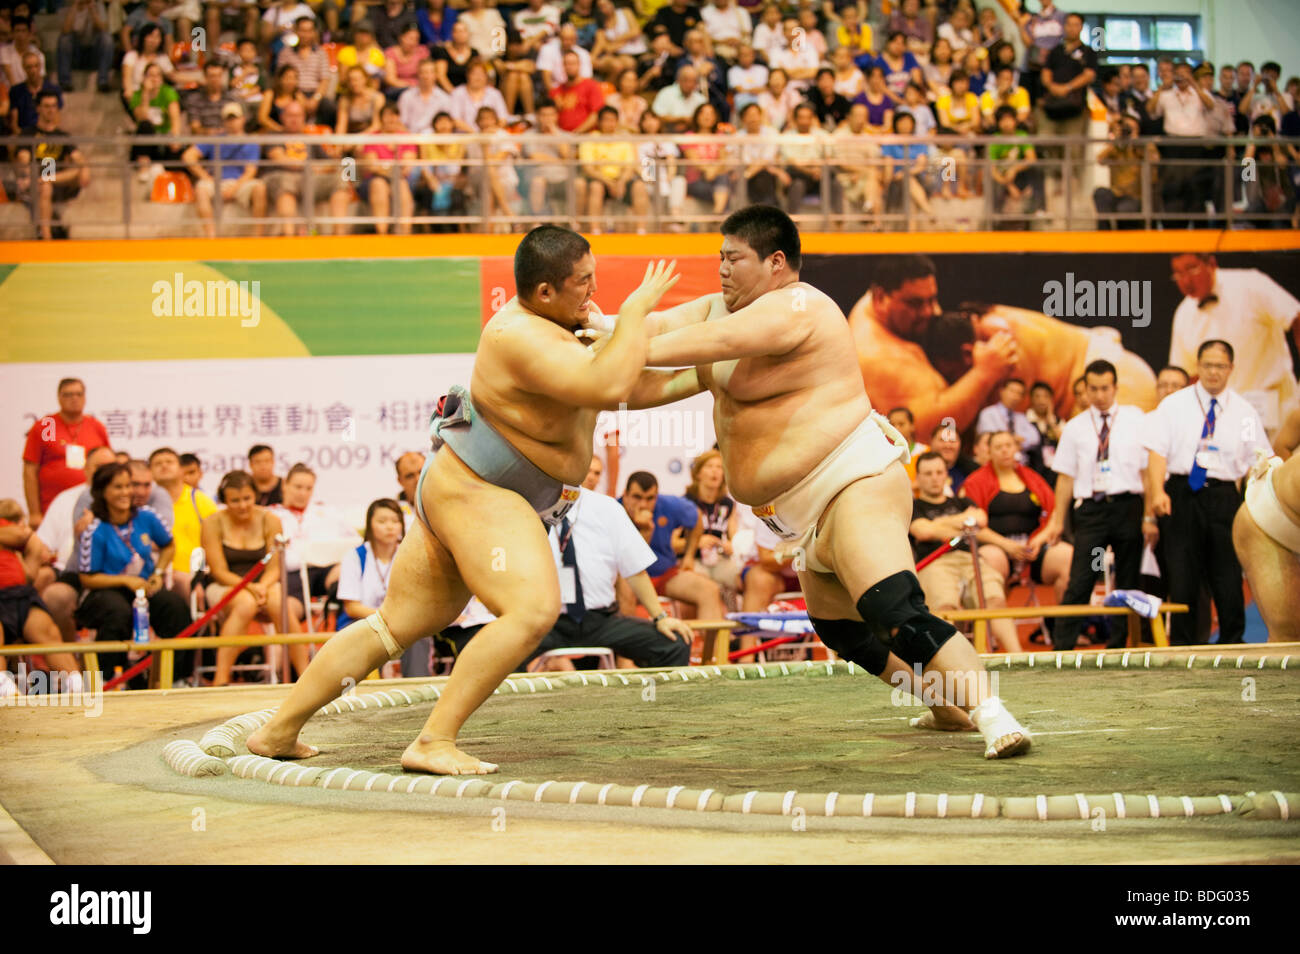 Sumo Wrestling, World Games, Kaohsiung, Taiwan, July 18, 2009 Stock Photo